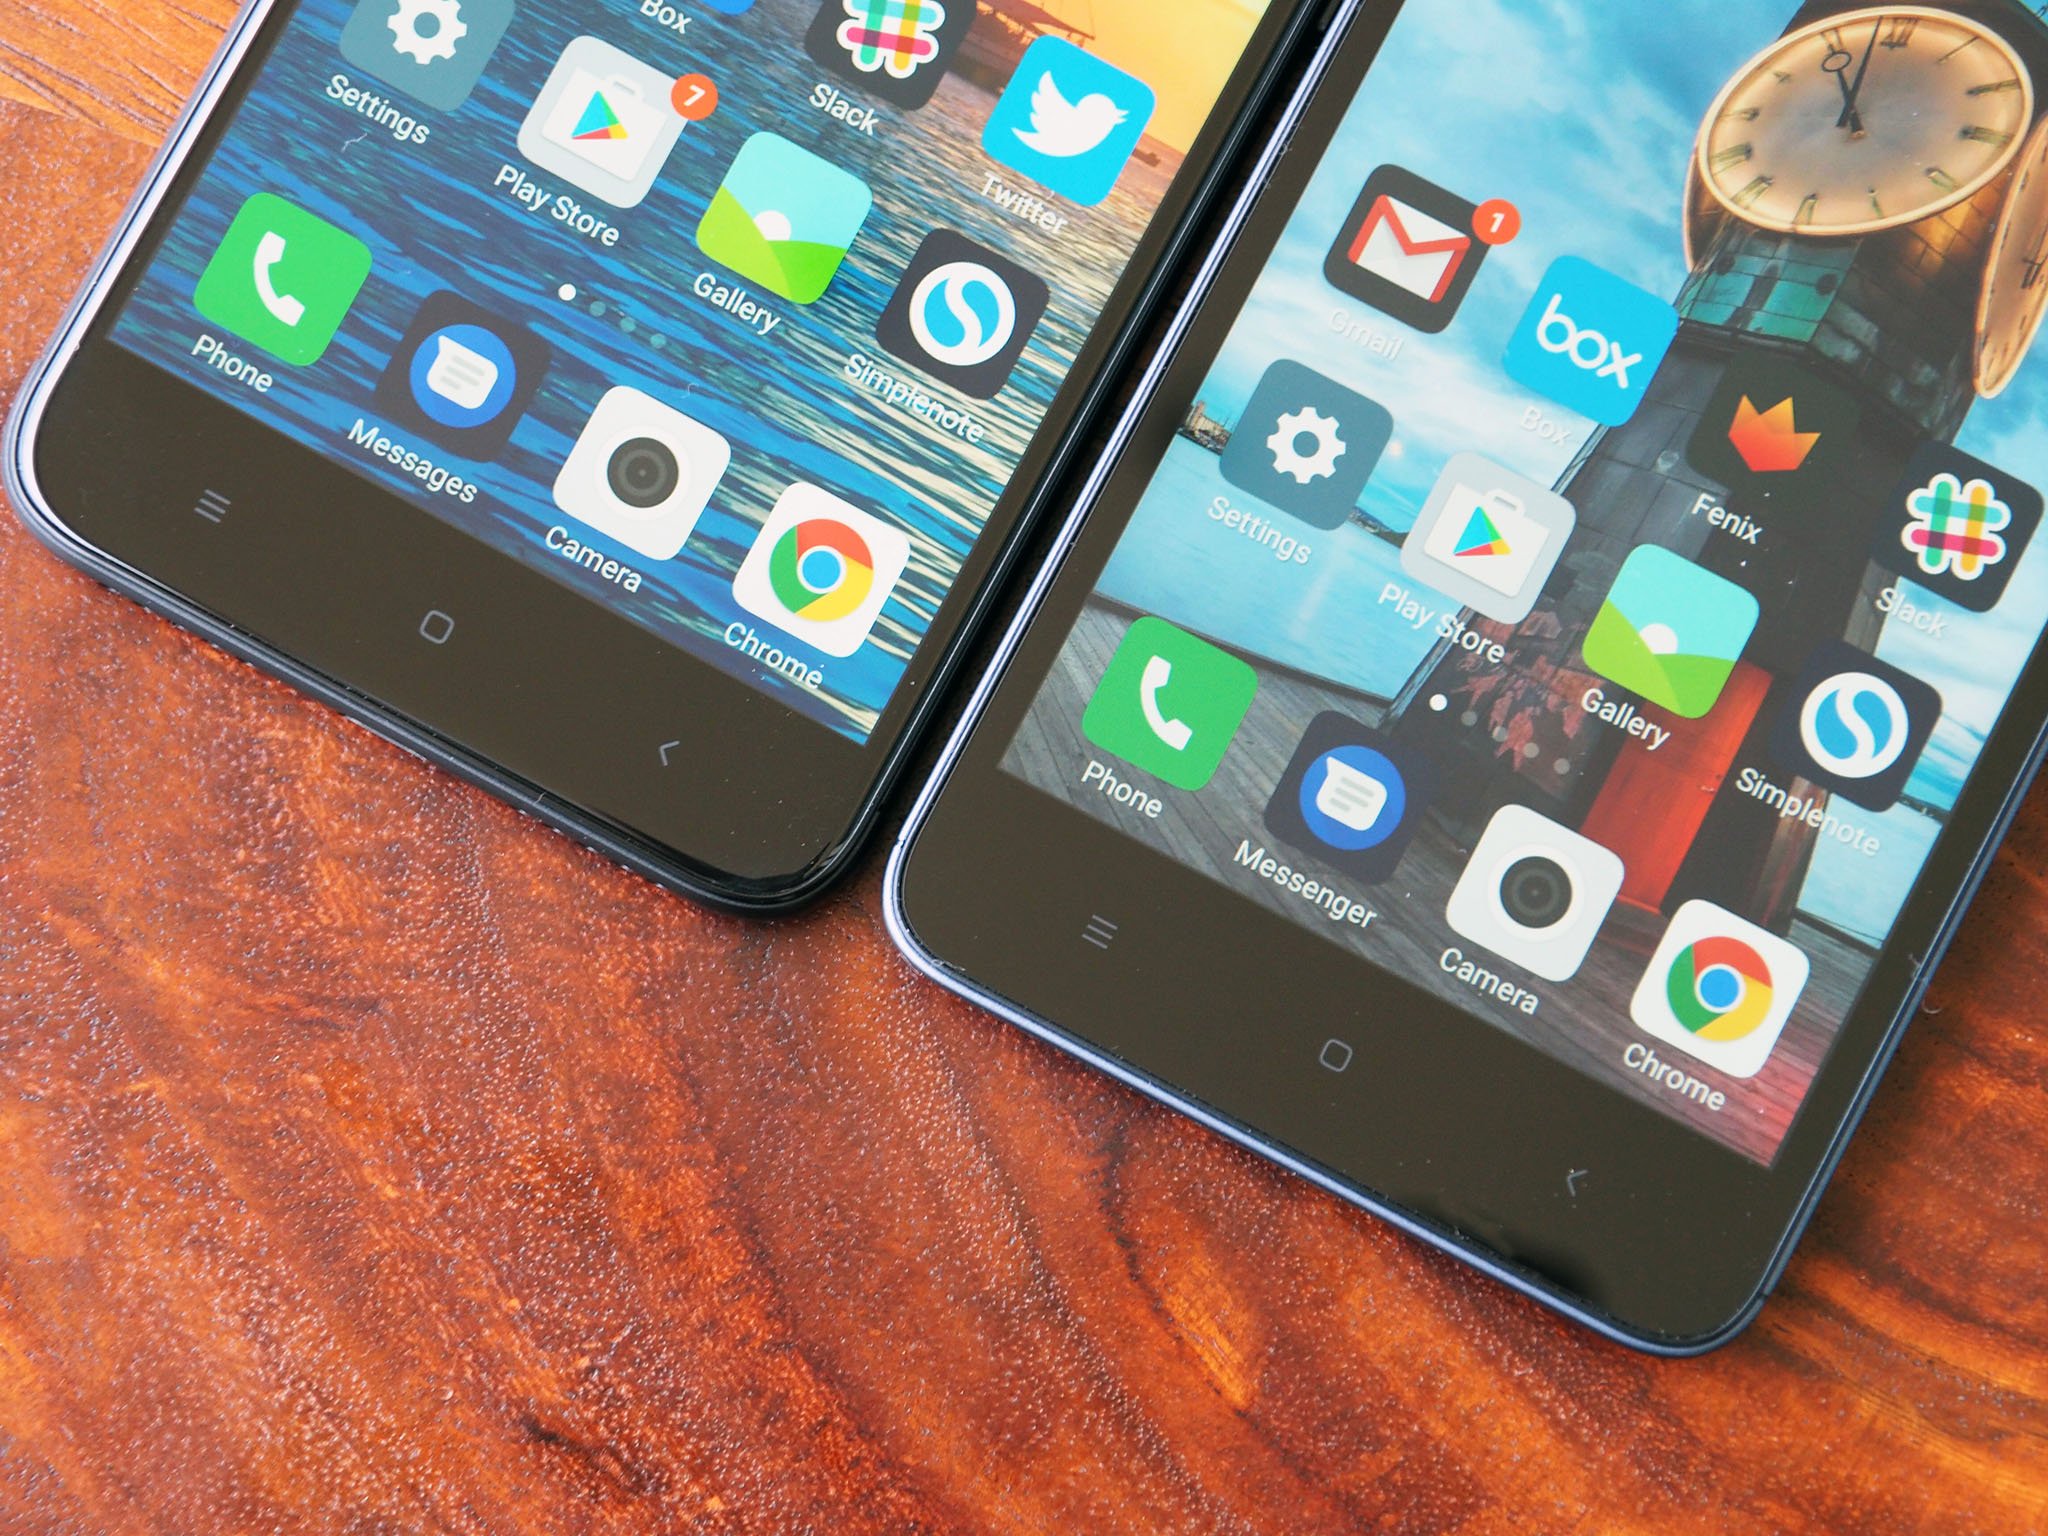 Xiaomi Redmi 4 Vs Redmi 4A Whats The Difference Android Central